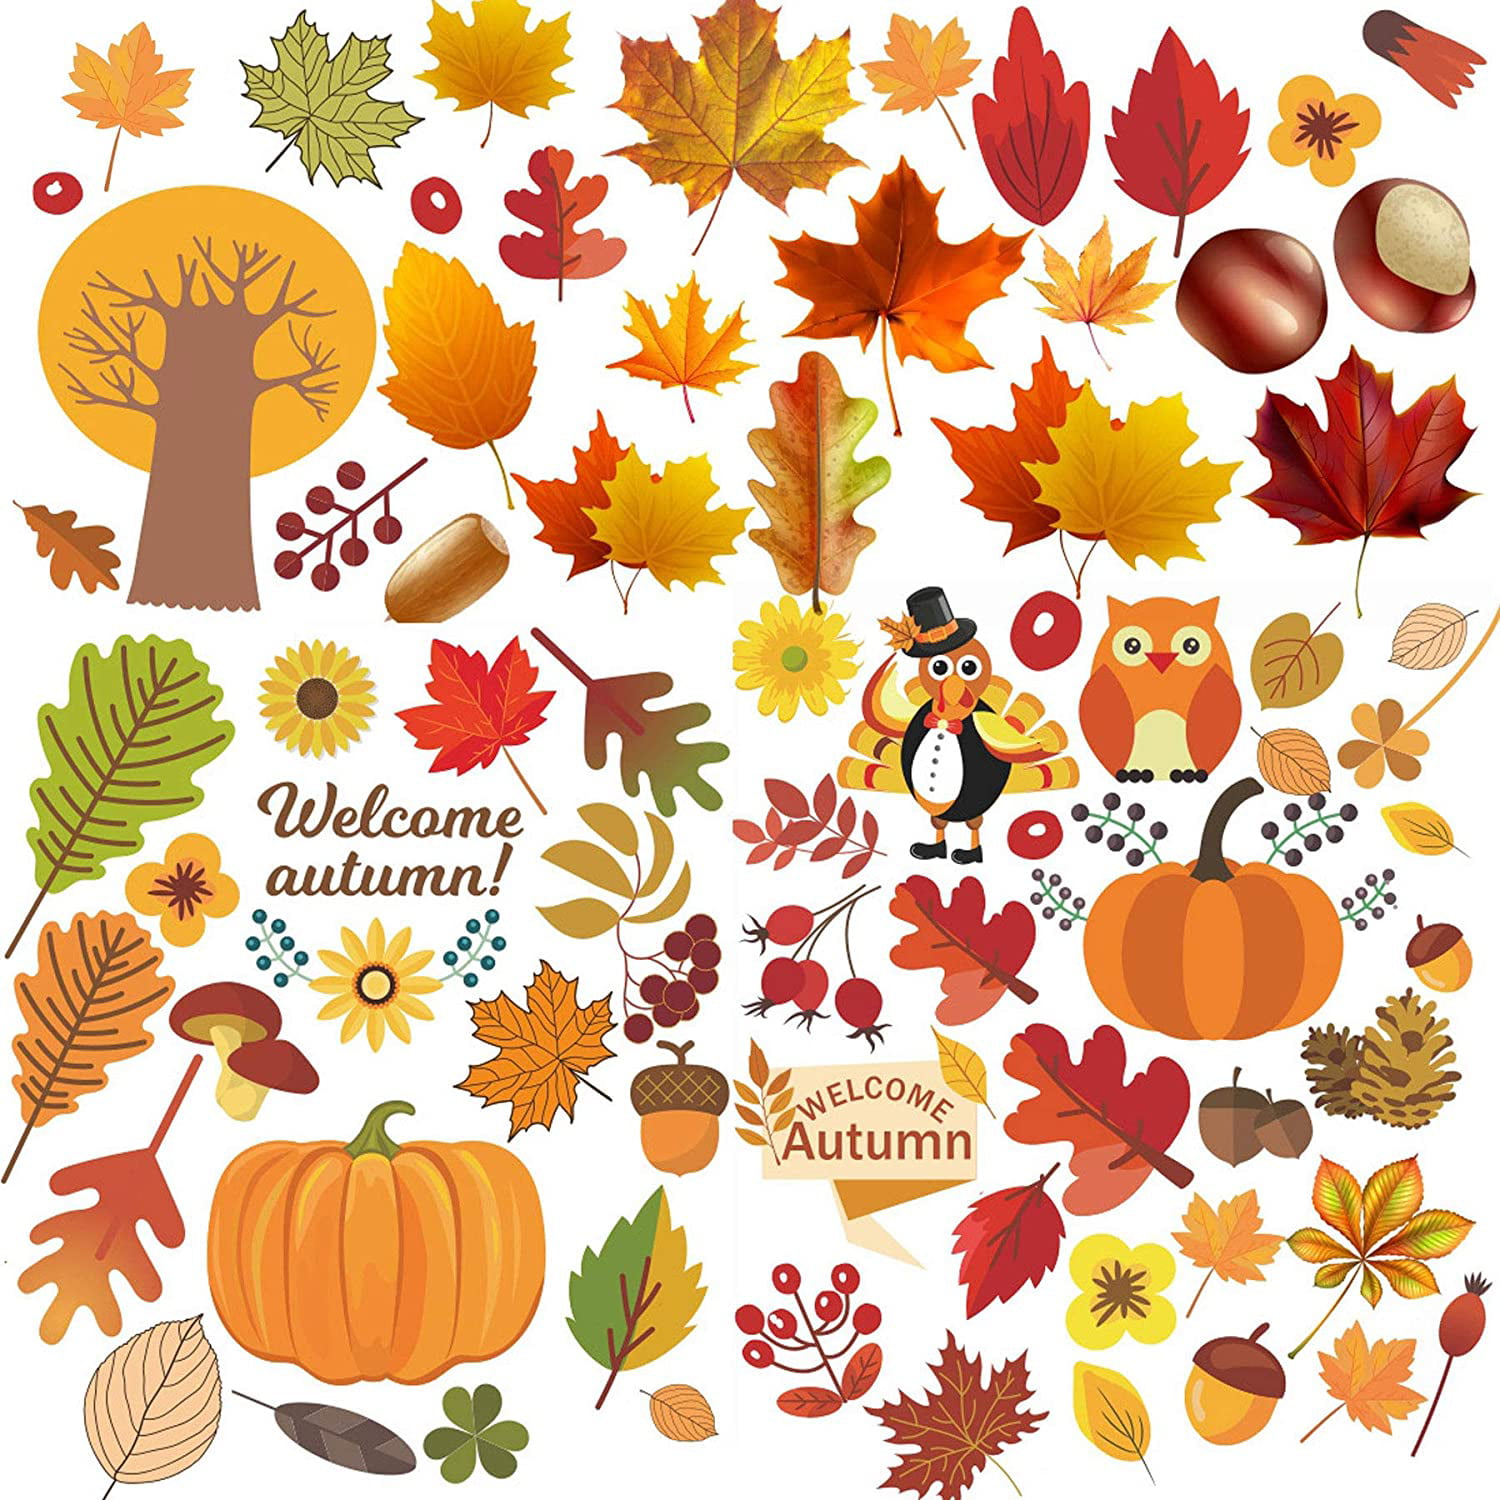 400 Pieces Fall Leaves Window Clings Stickers Thanksgiving Pumpkin Turkey Straw Hat Maple Leaves Acorns Window Stickers for Autumn Party Decorations Style Set 2 3 Sheets 